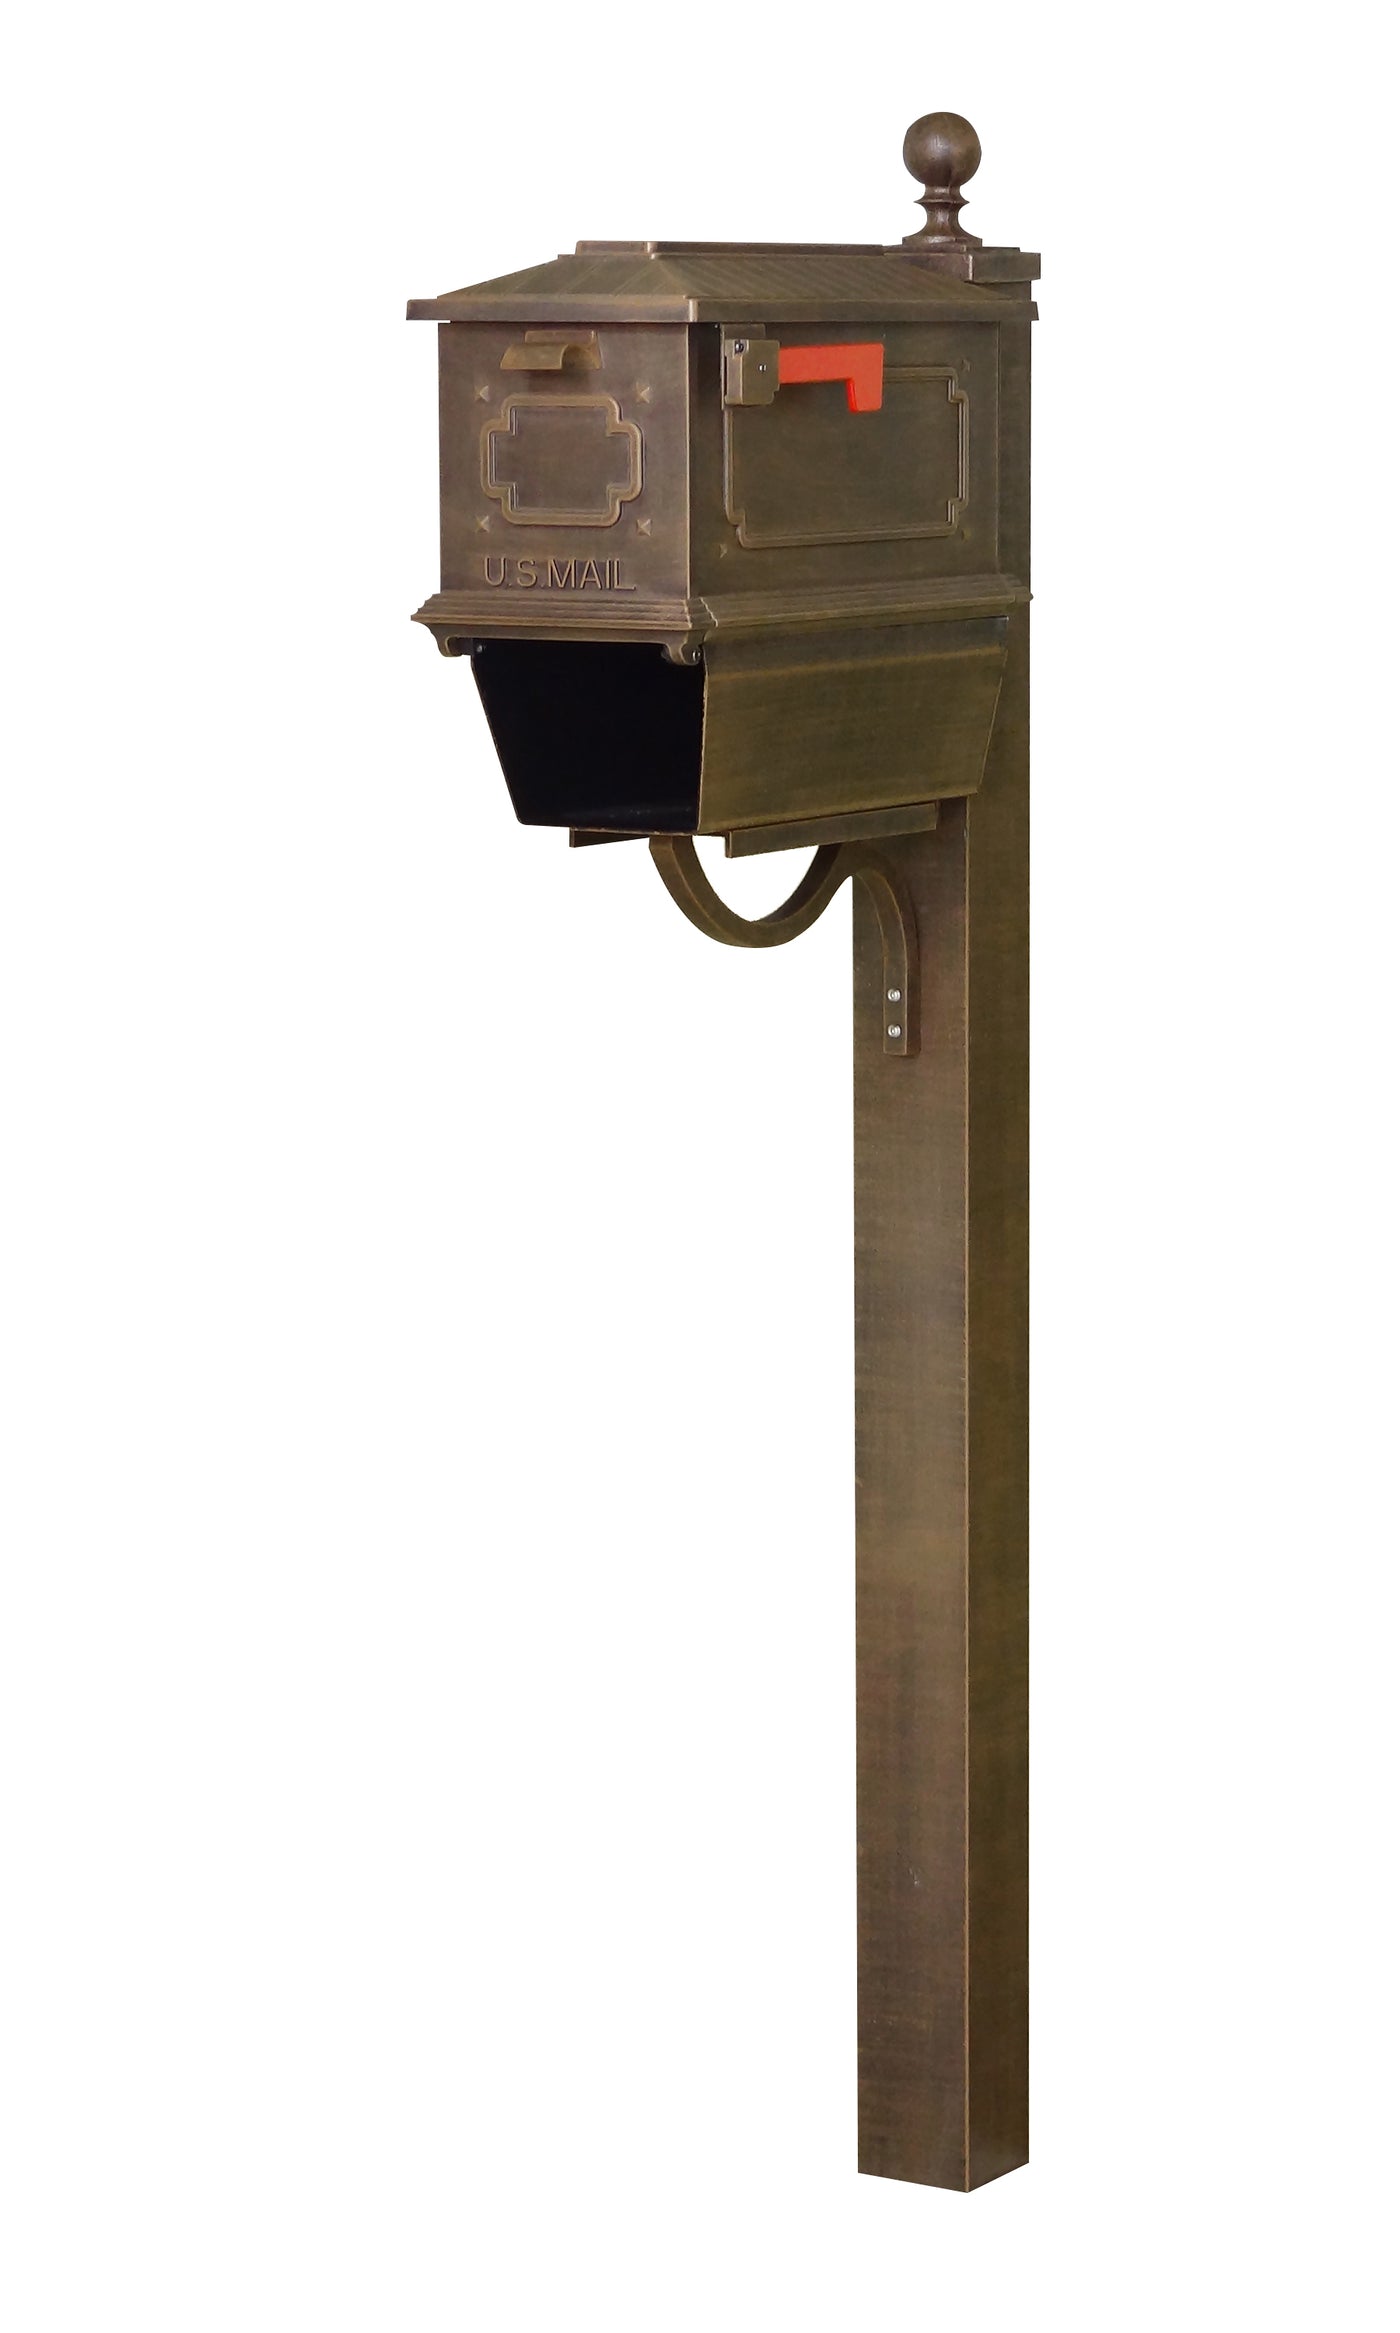 Kingston Curbside Mailbox with Newspaper Tube and Springfield Mailbox Post